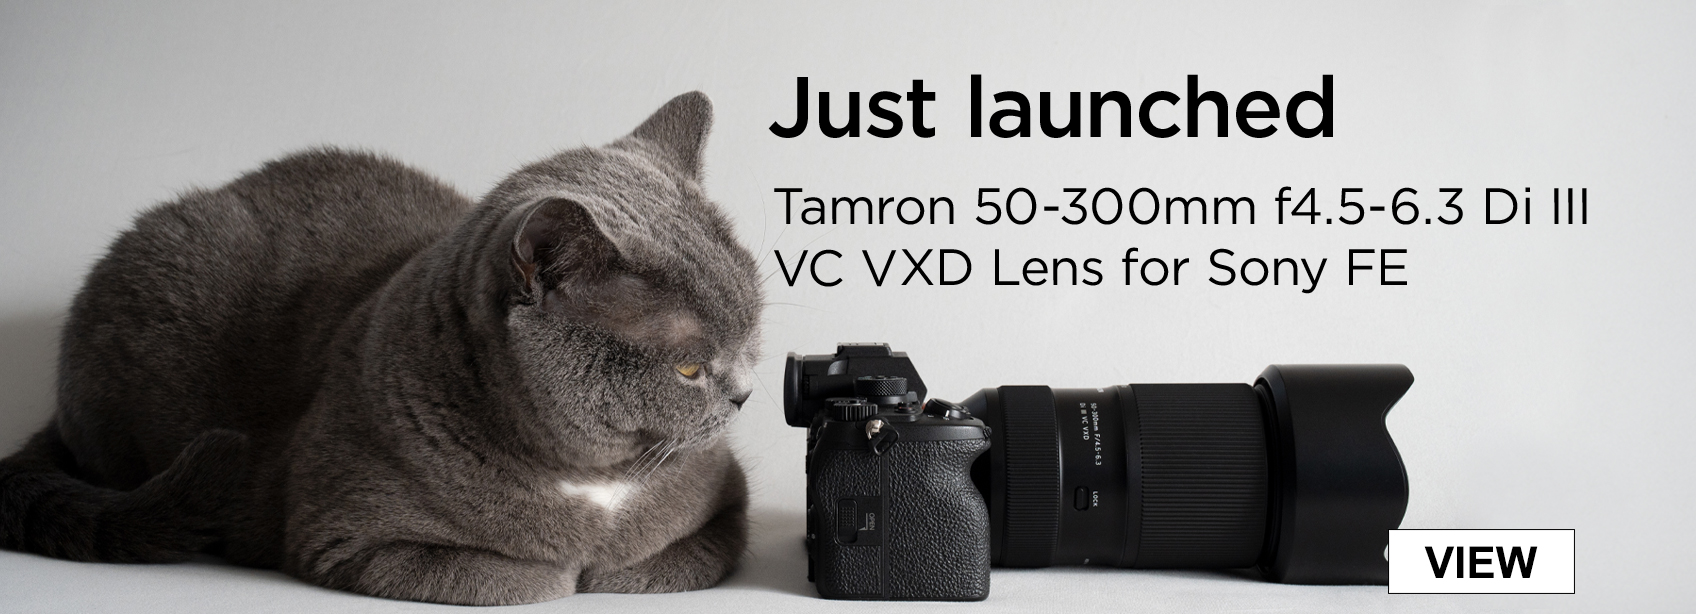 Just launched Tamron 50-300mm f4.5-6.3 DI III VC VXD Lens for Sony FE